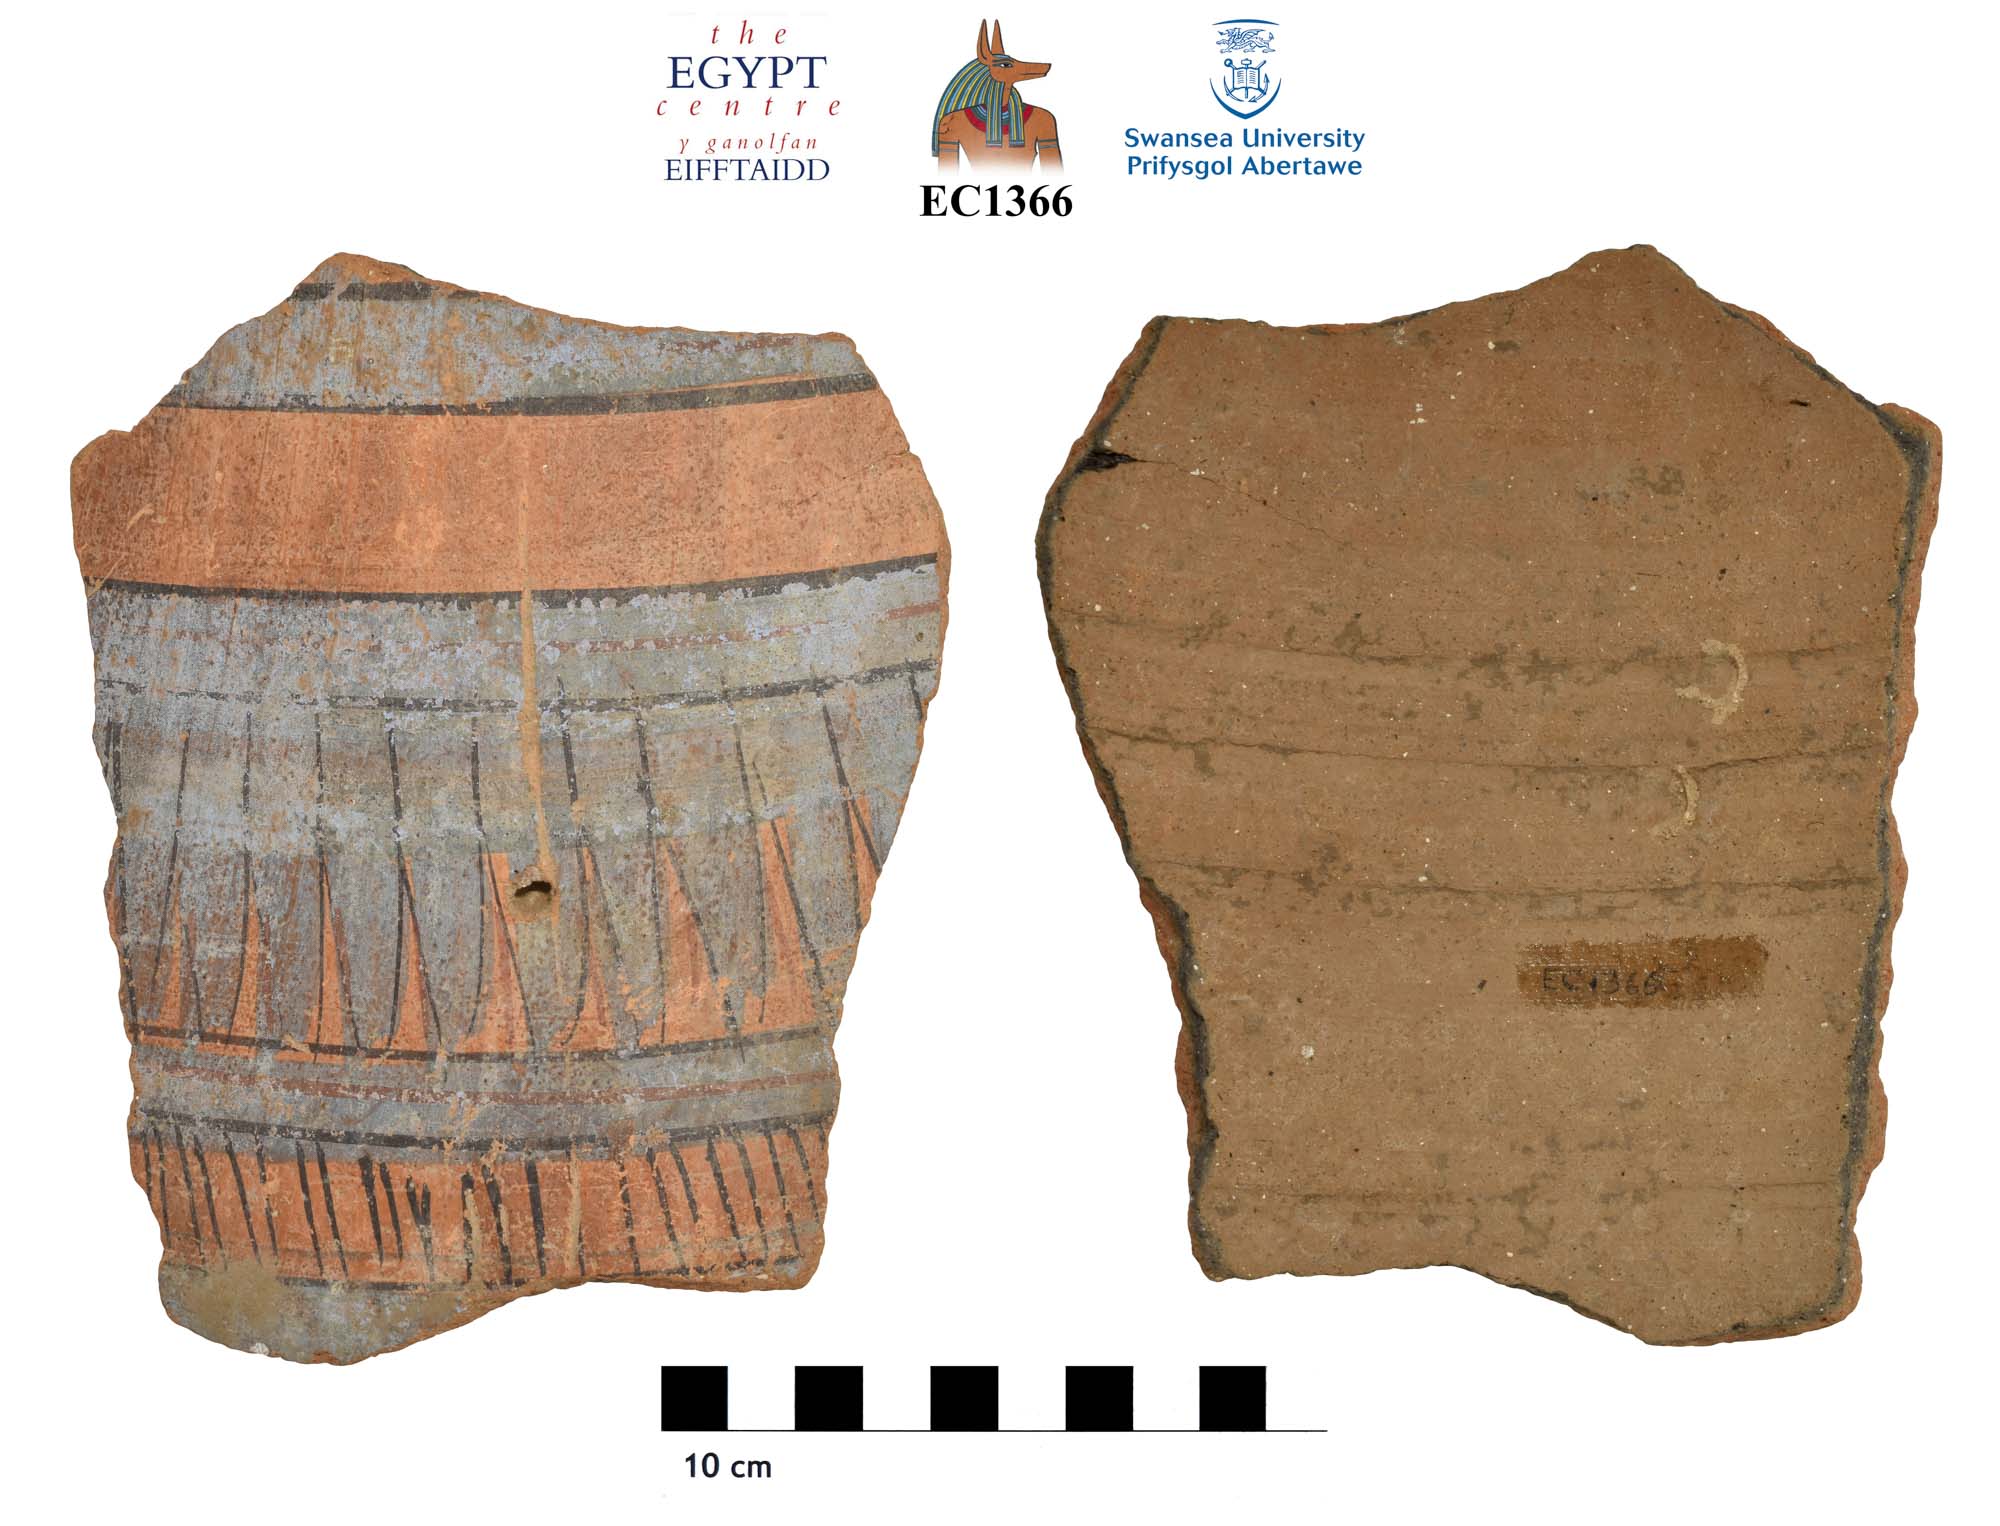 Image for: Pottery sherd